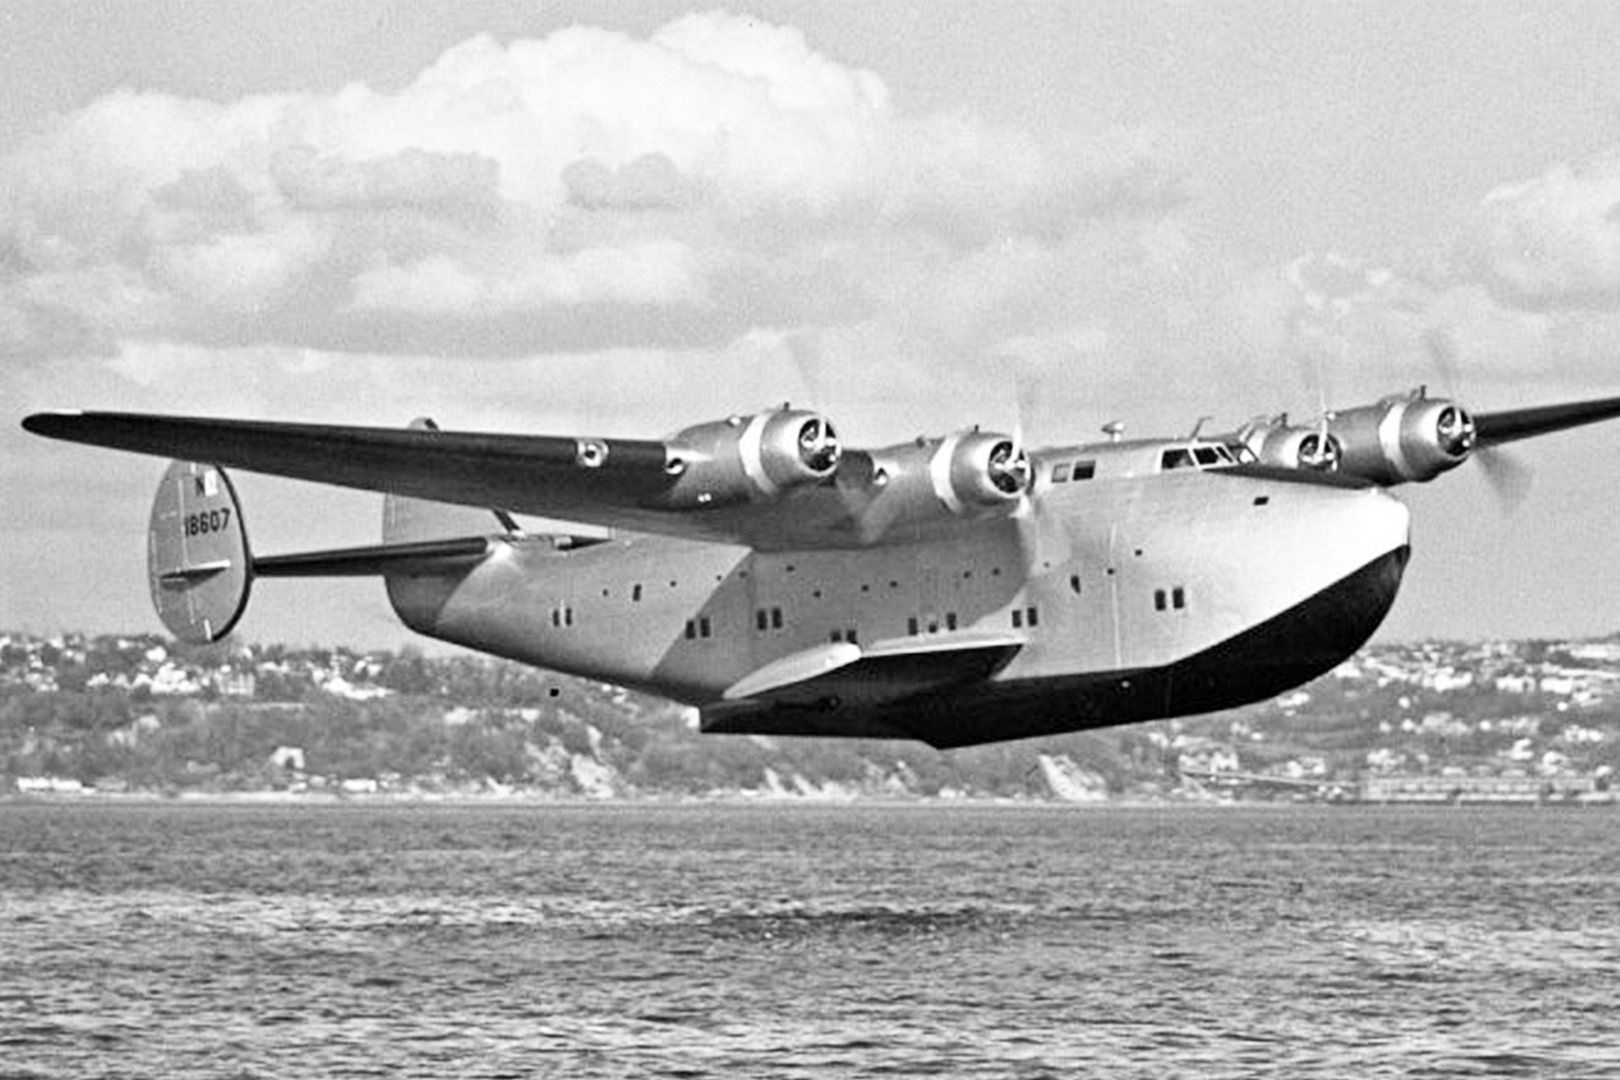 A Boeing 314 flying just above water.